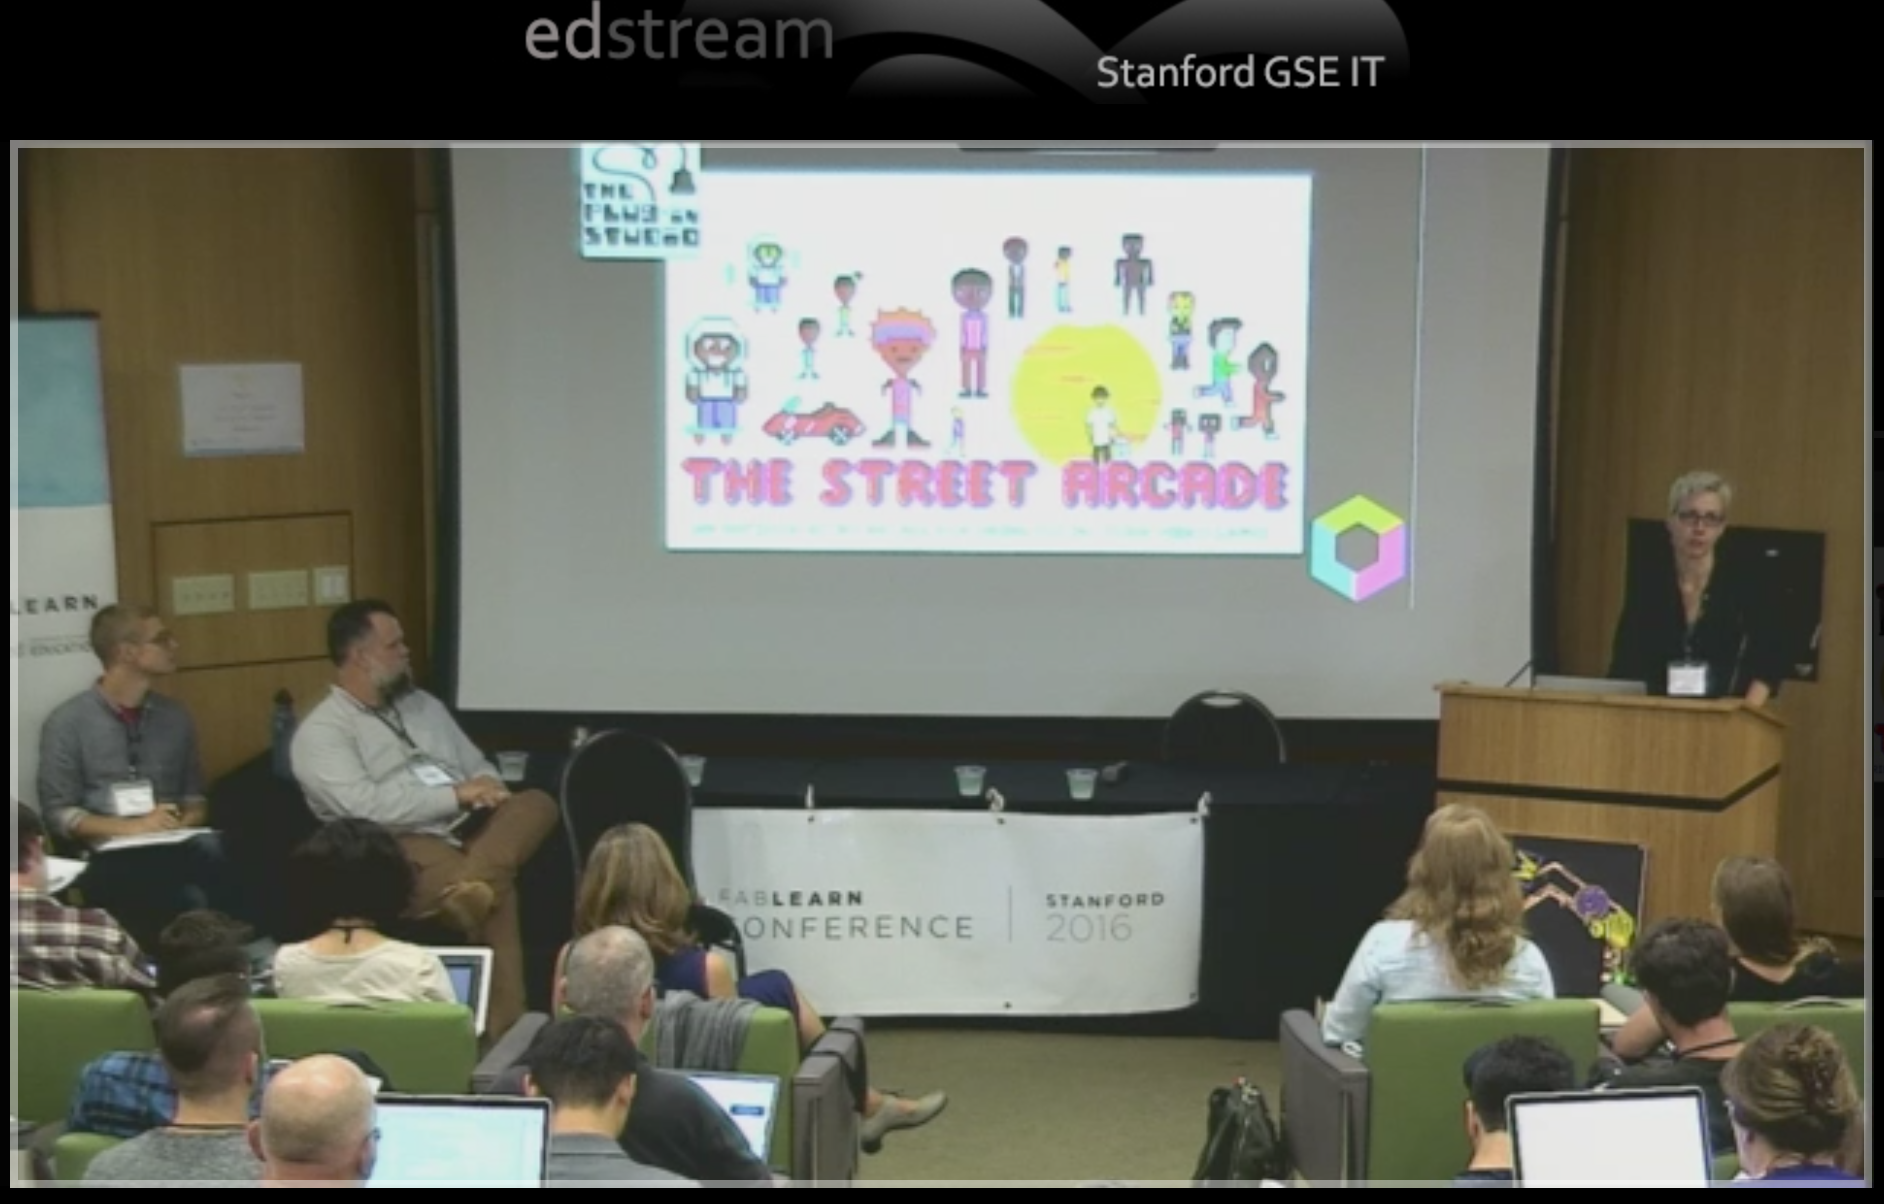 still from presentation at Stanford University's FabLearn Conference 2016